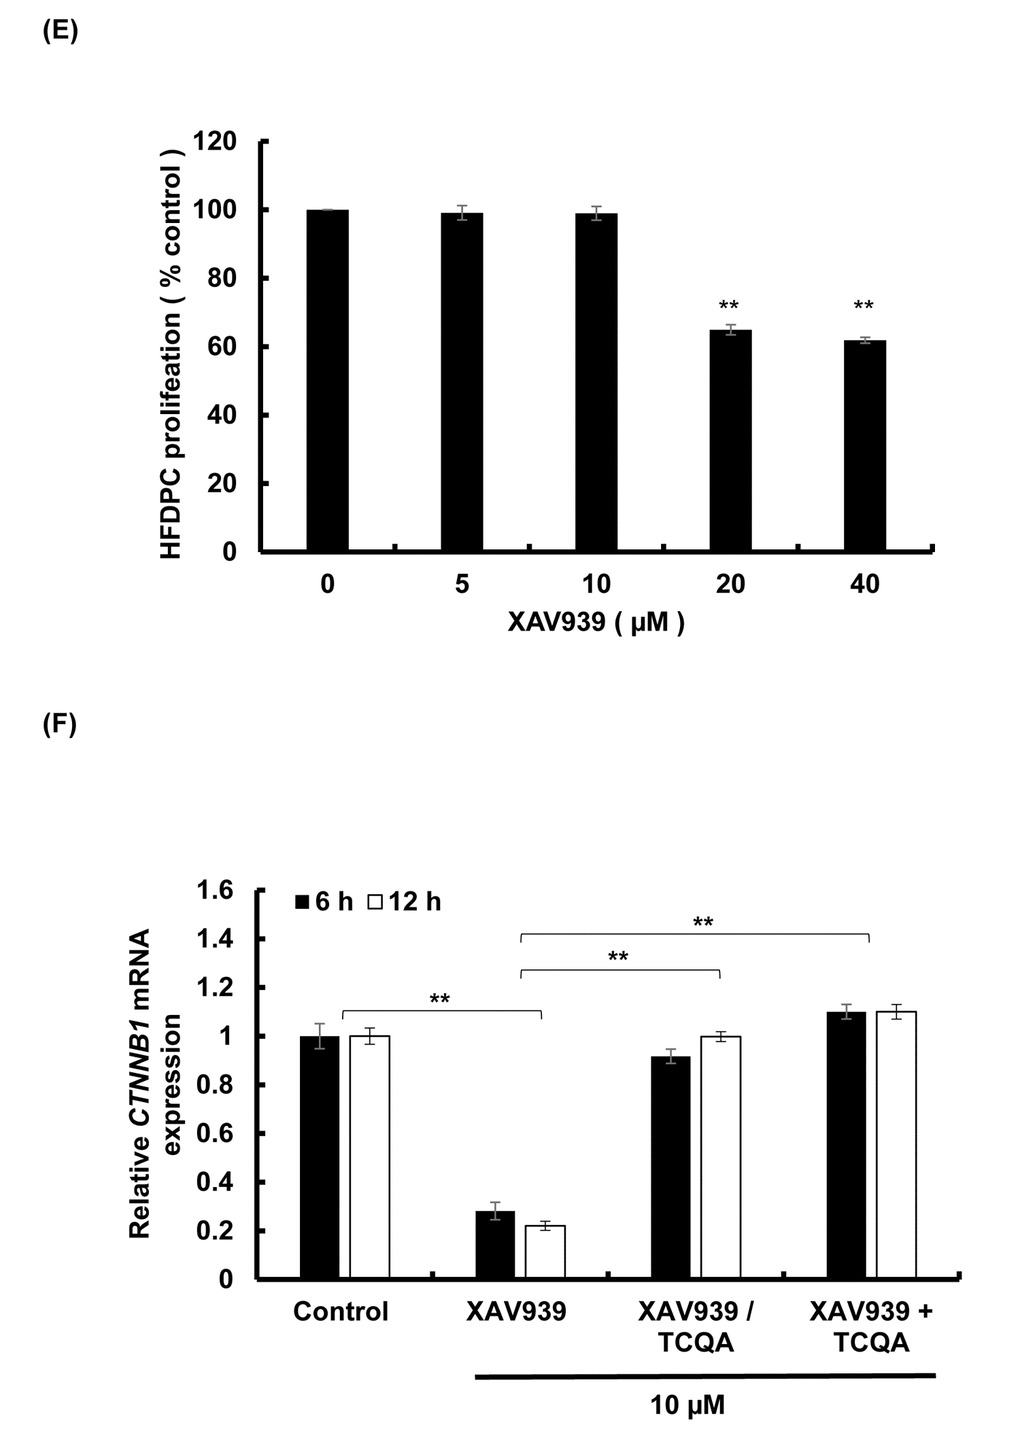 TCQA stimulated β-catenin expression in human hair follicle dermal papilla cells (HFDPCs) (E) Cell proliferation of HFDPC was assessed after 48 h treatment with various concentrations of XAV939 (β-catenin inhibitor). (F) Gene expression expressions of CTNNB1 (β-catenin) after treatment with 10 µM XAV939 for 6 and 12 h, with 10 µM XAV939 for 6 and 12 h then with 10 µM TCQA for 6 h and 12 h (XAV939/TCQA), and finally with co-treatment of 10 µM XAV939 and 10 µM TCQA for 6 and 12 h (XAV939+TCQA). Results represent the mean ± SD of three independent experiments. *Statistically significant (P ≤0.05) difference between control and treated cells. **Statistically significant (P ≤0.01) difference between control and treated cells. ##Statistically significant (P ≤0.01) difference between Minox-treated cells and TCQA-treated cells.